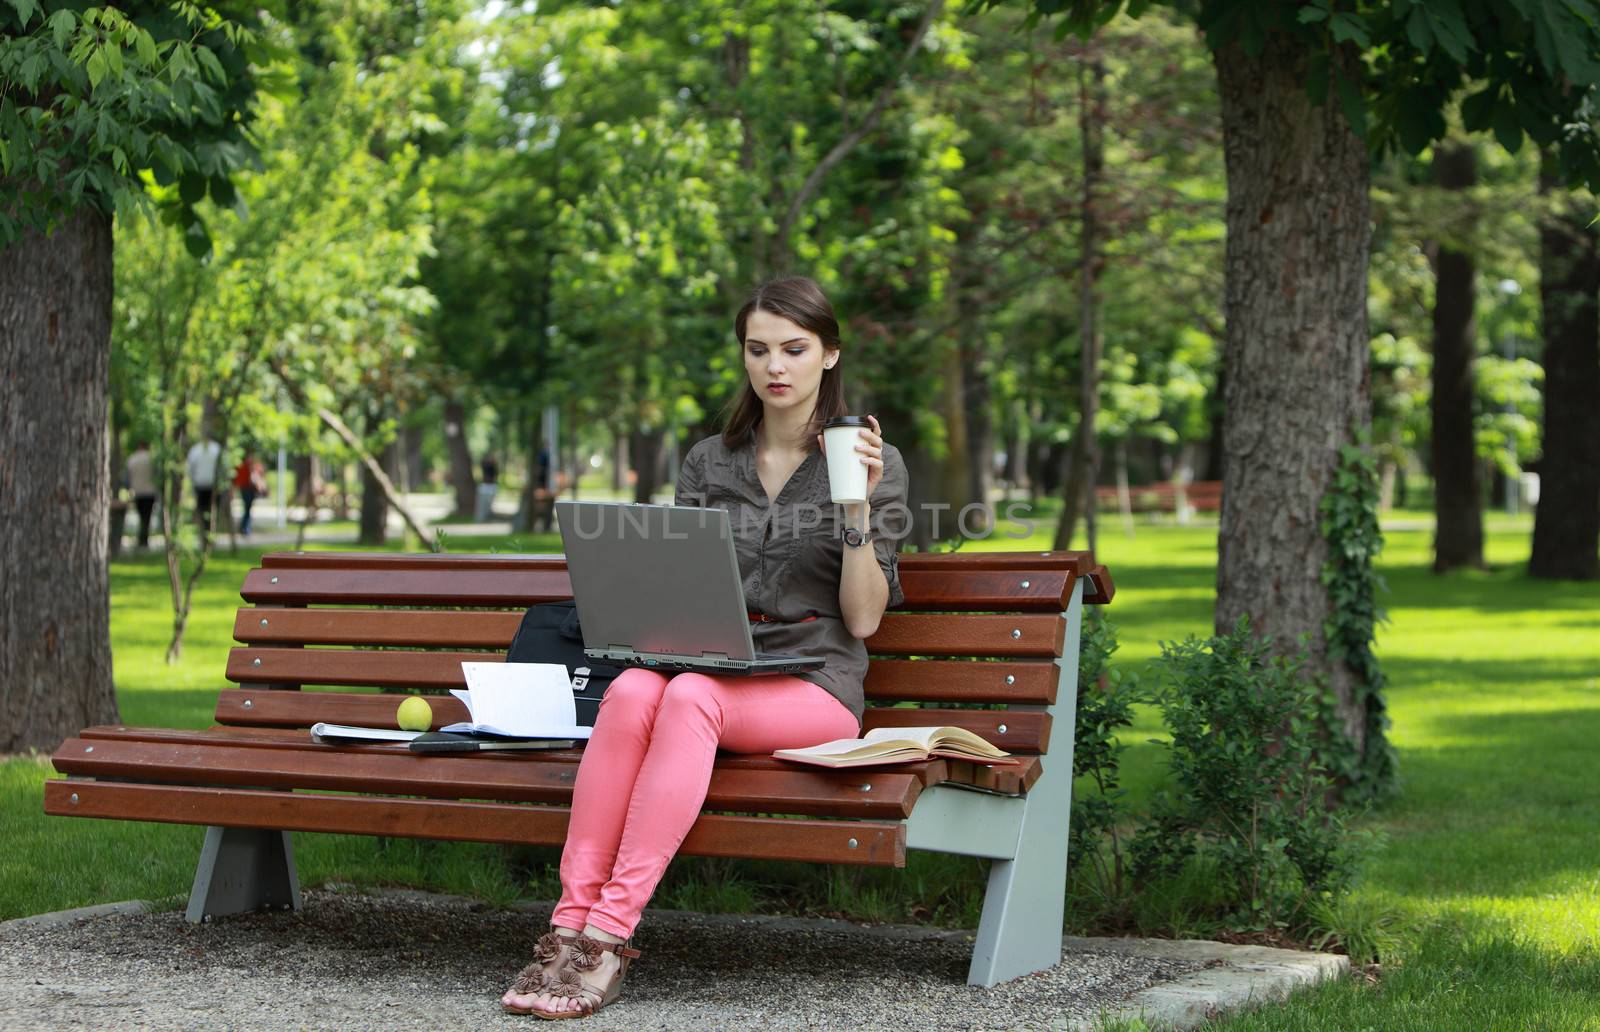 Young woman working on a laptop outside in a park.